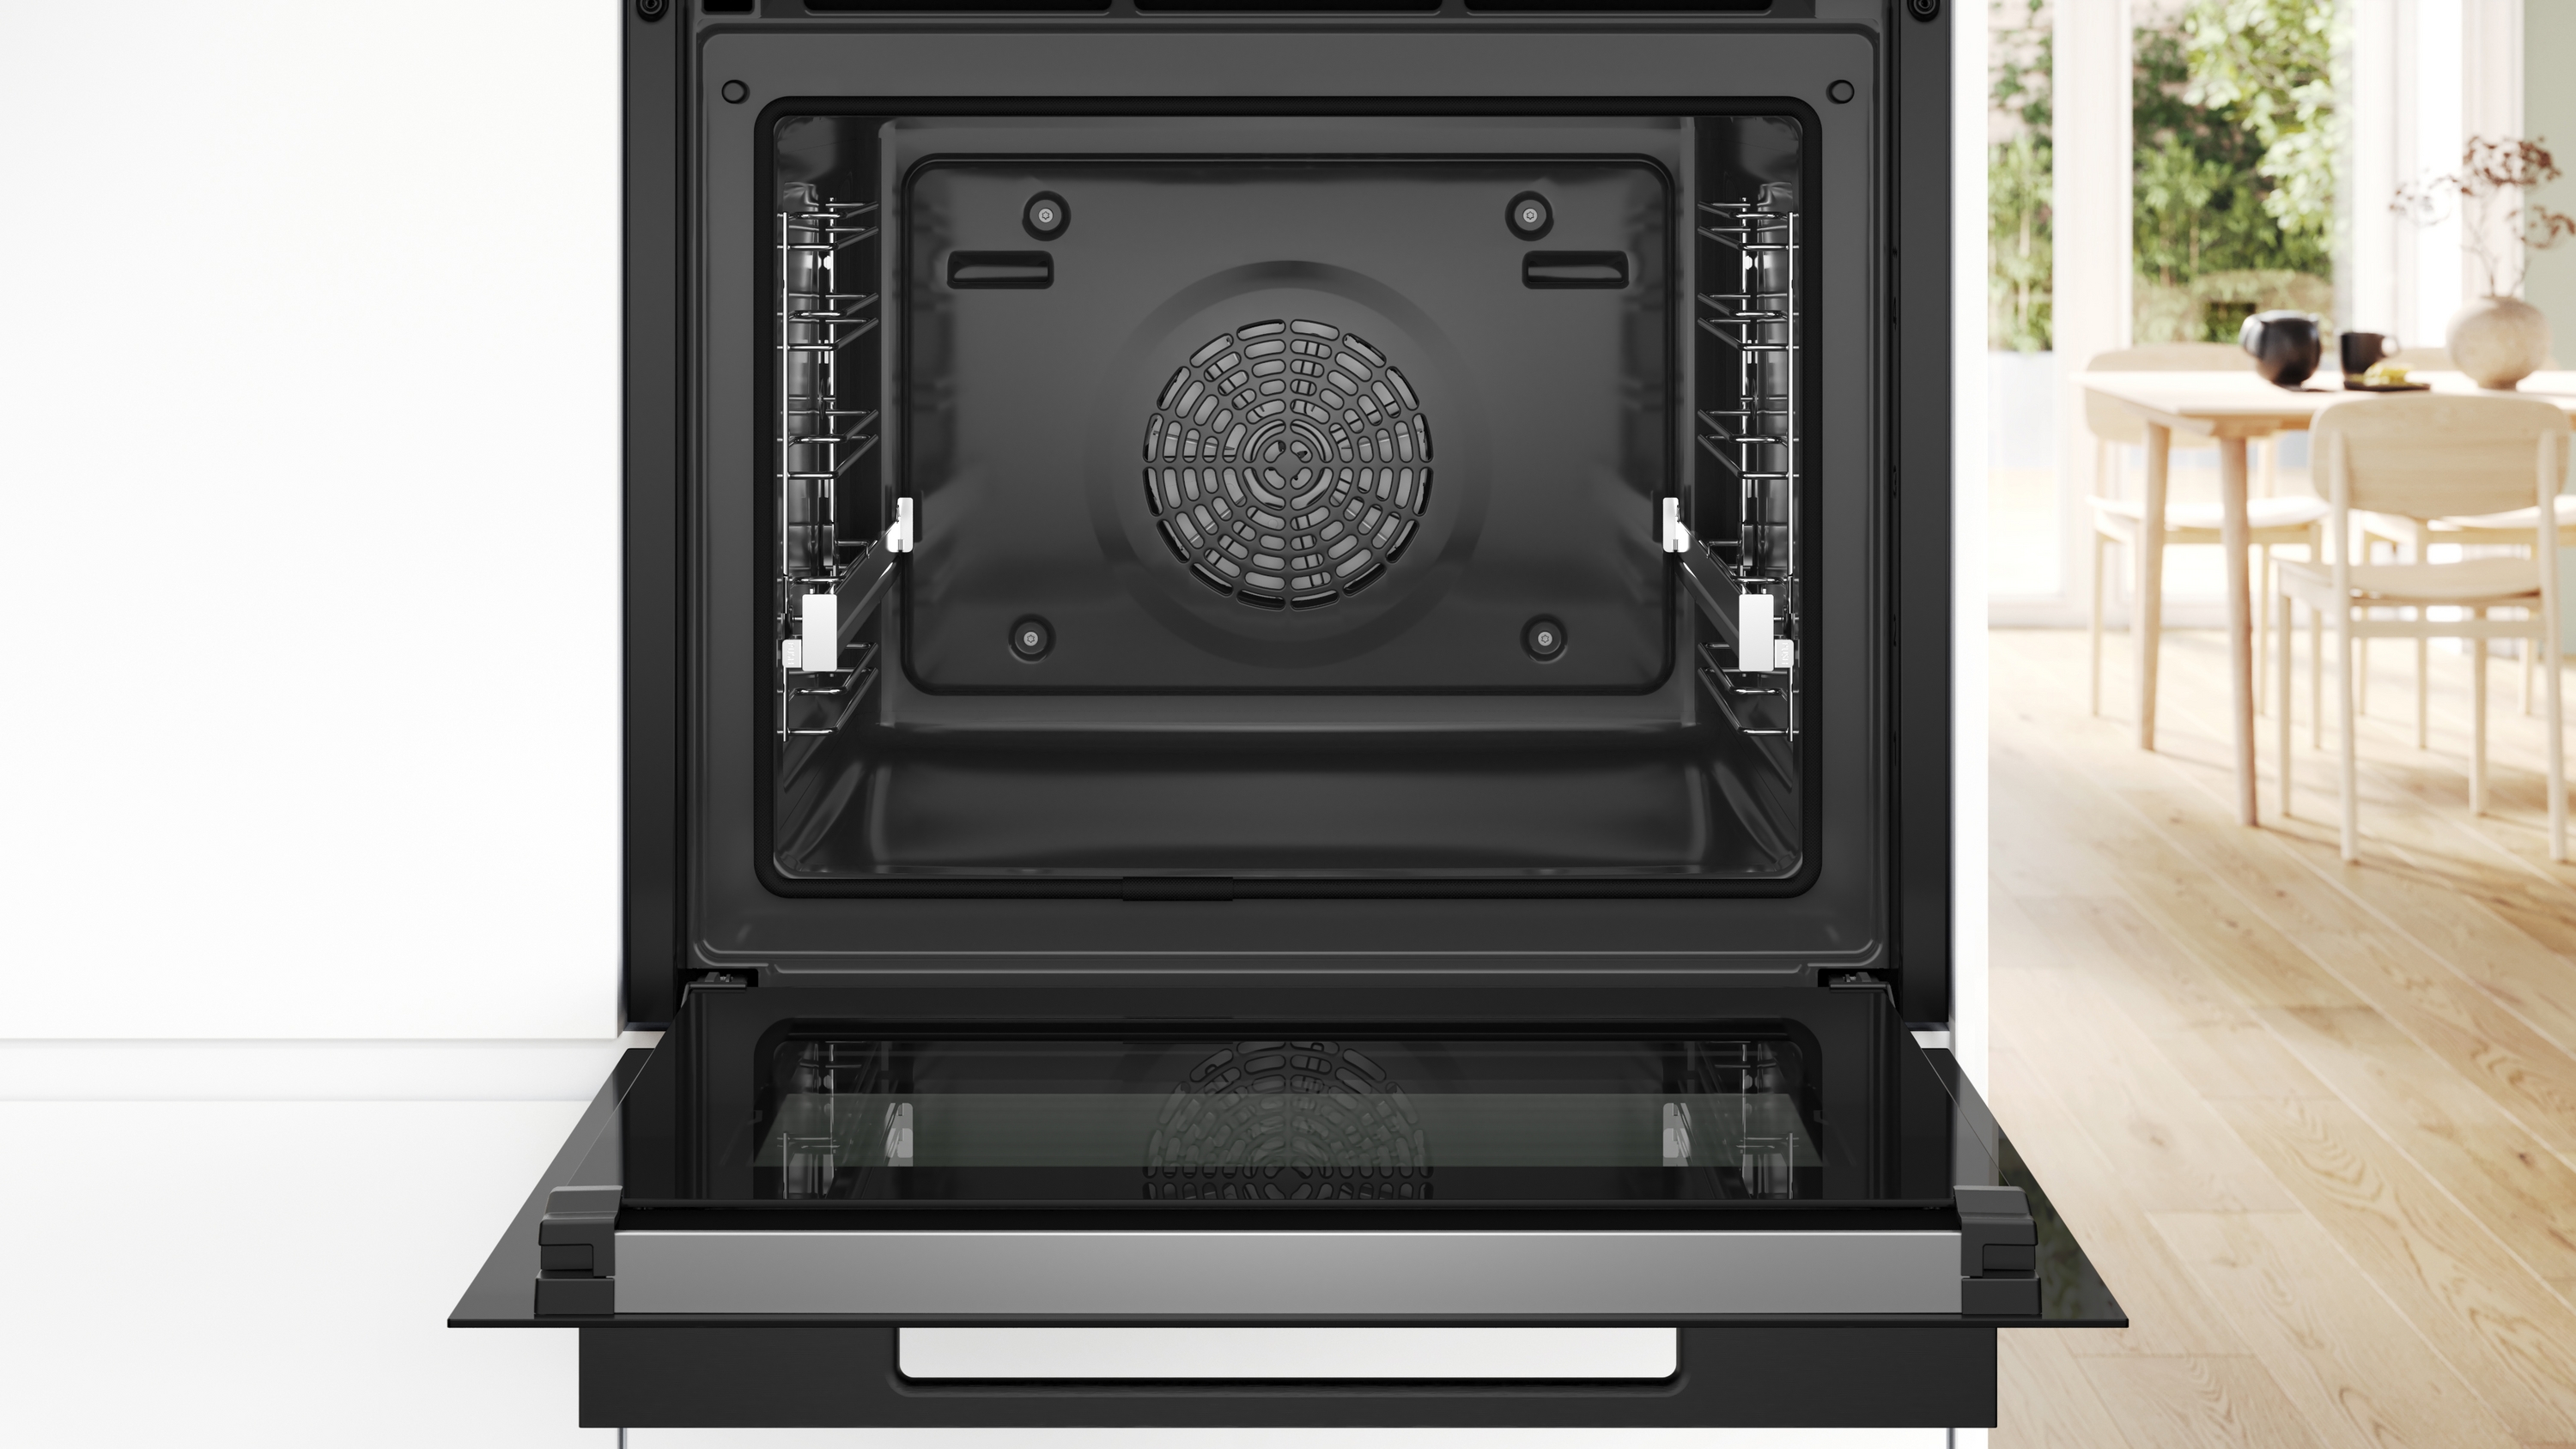 Series 8, Built-in oven with added steam function, 60 x 60 cm, Black, HRG978NB1